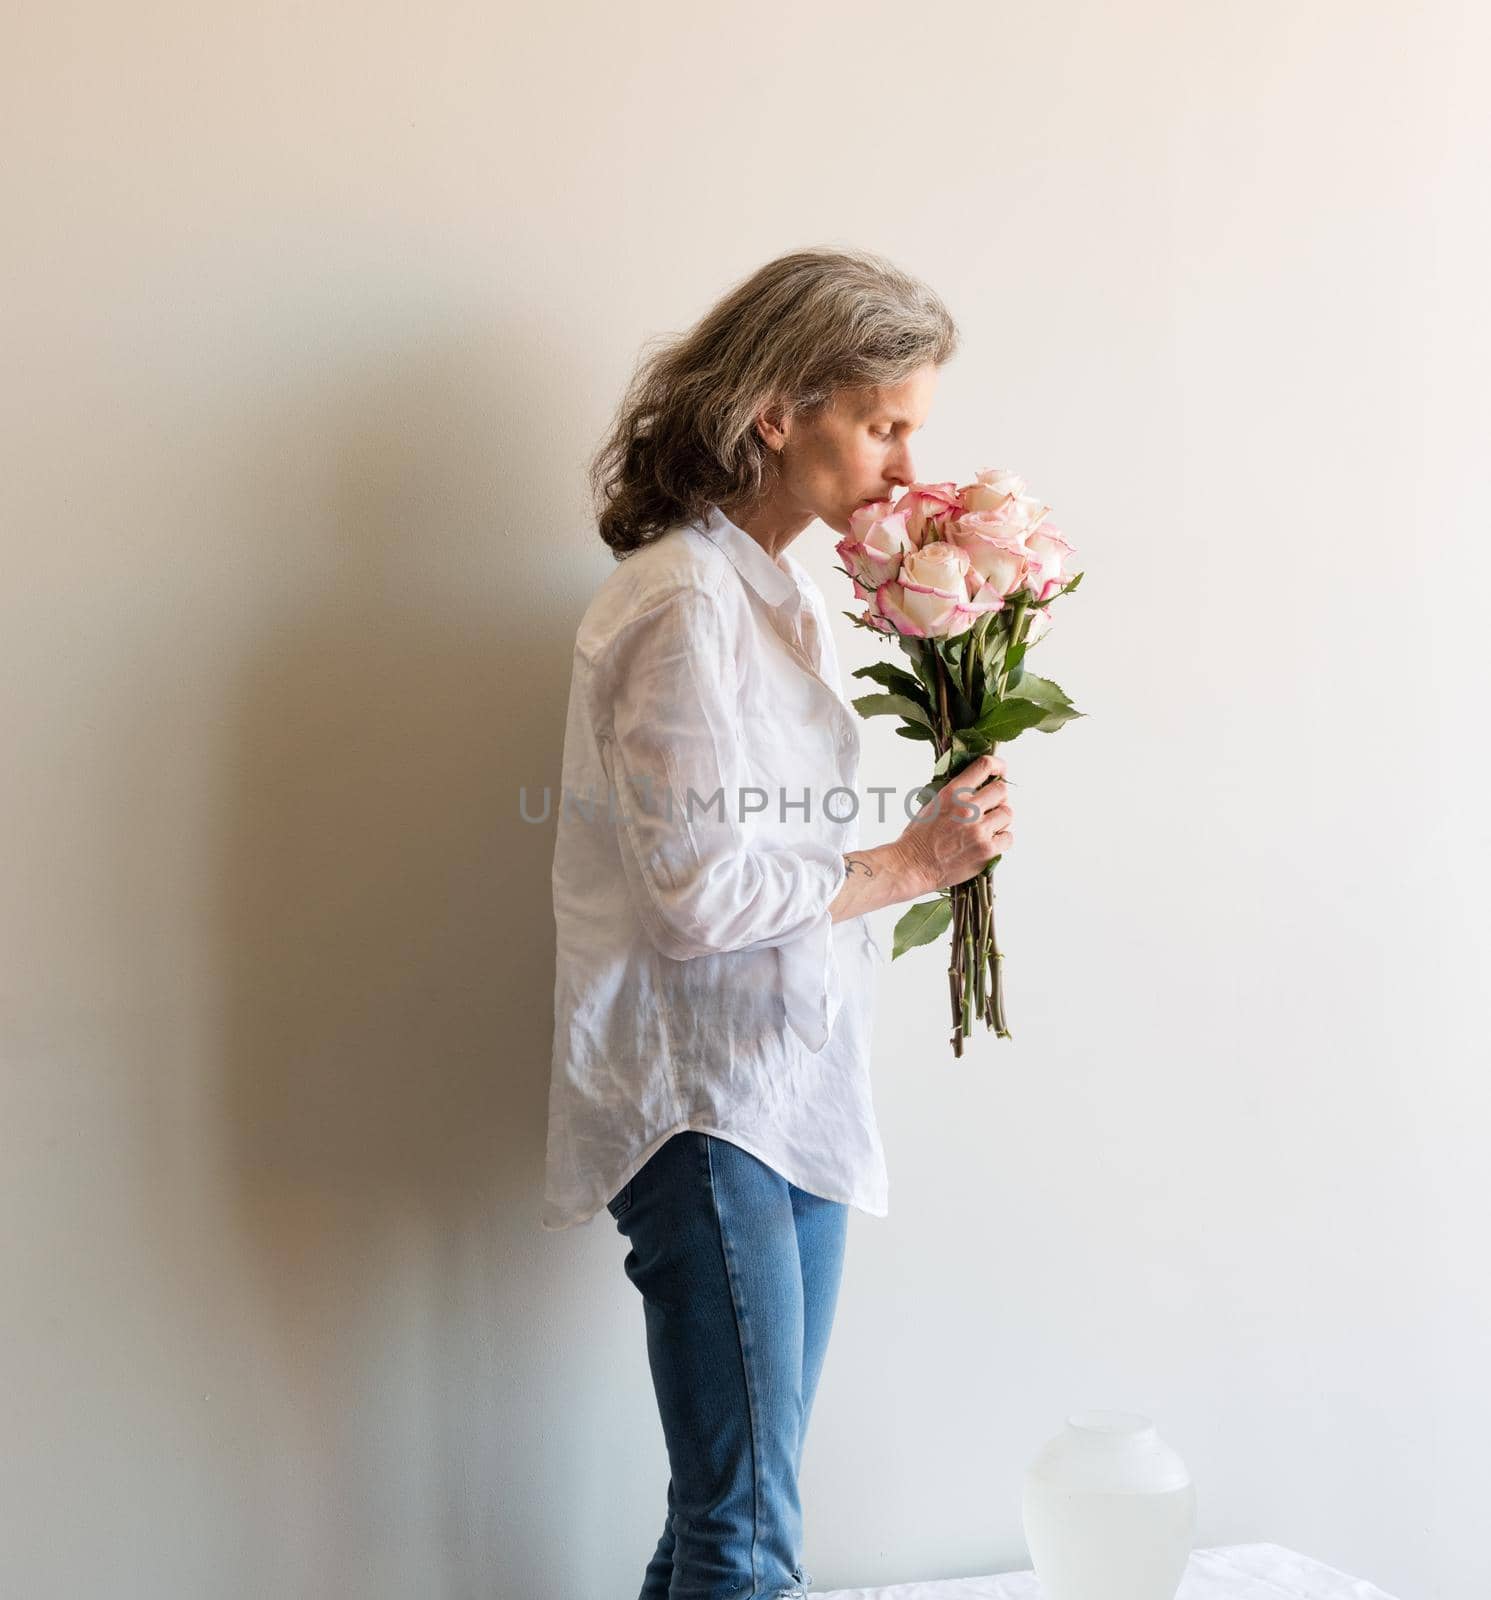 Middle aged woman with grey hair and white shirt smelling pink and cream roses near vase on table by natalie_board